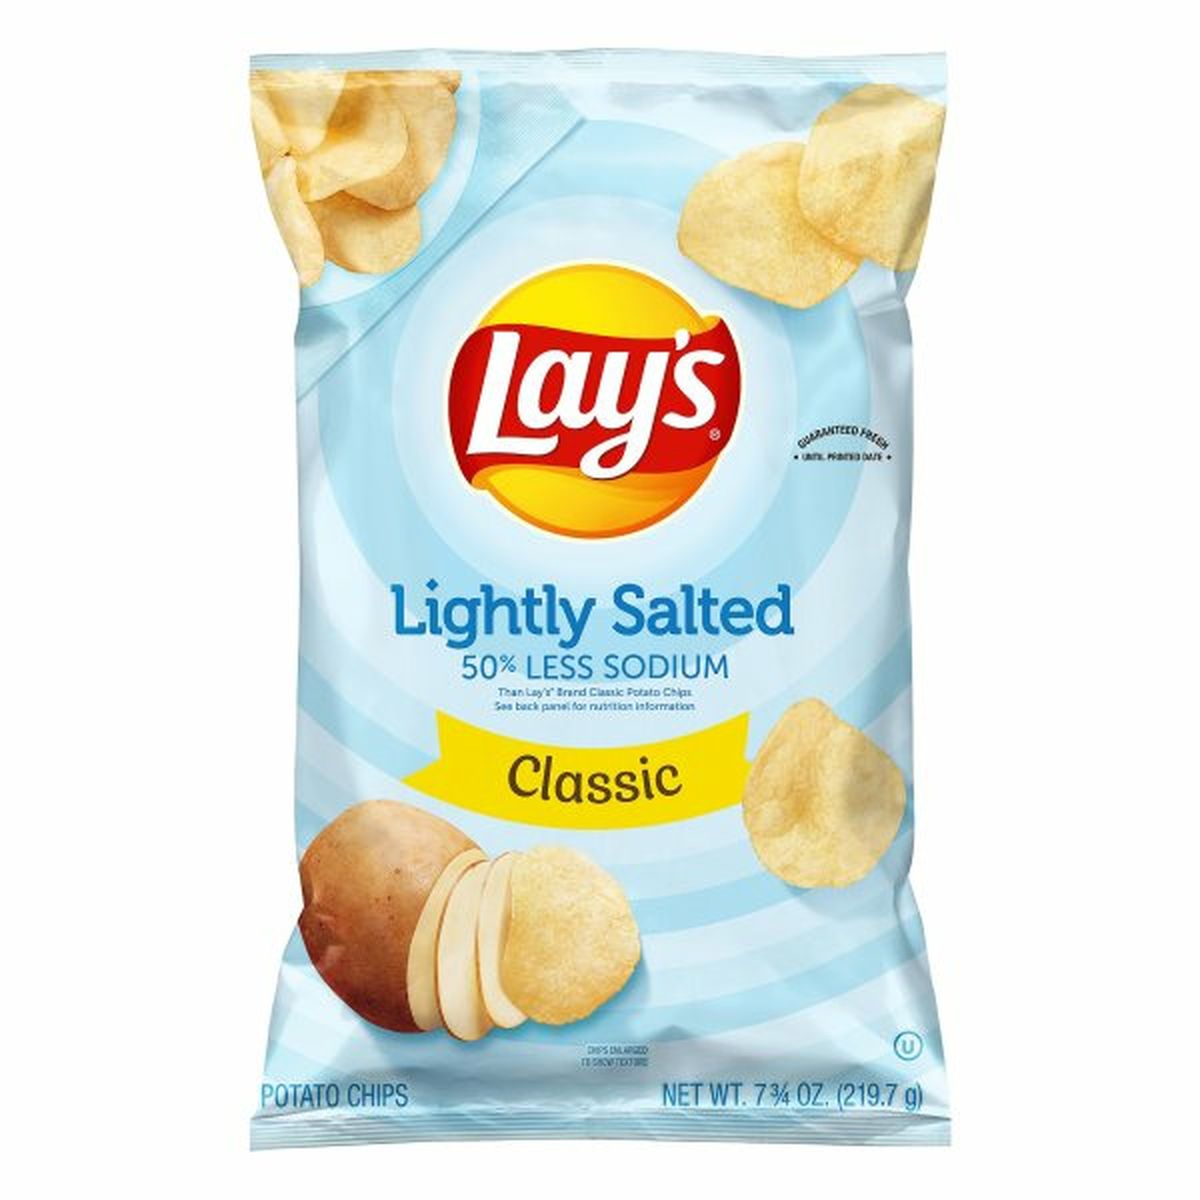 Calories in Lay's Potato Chips, Classic, Lightly Salted